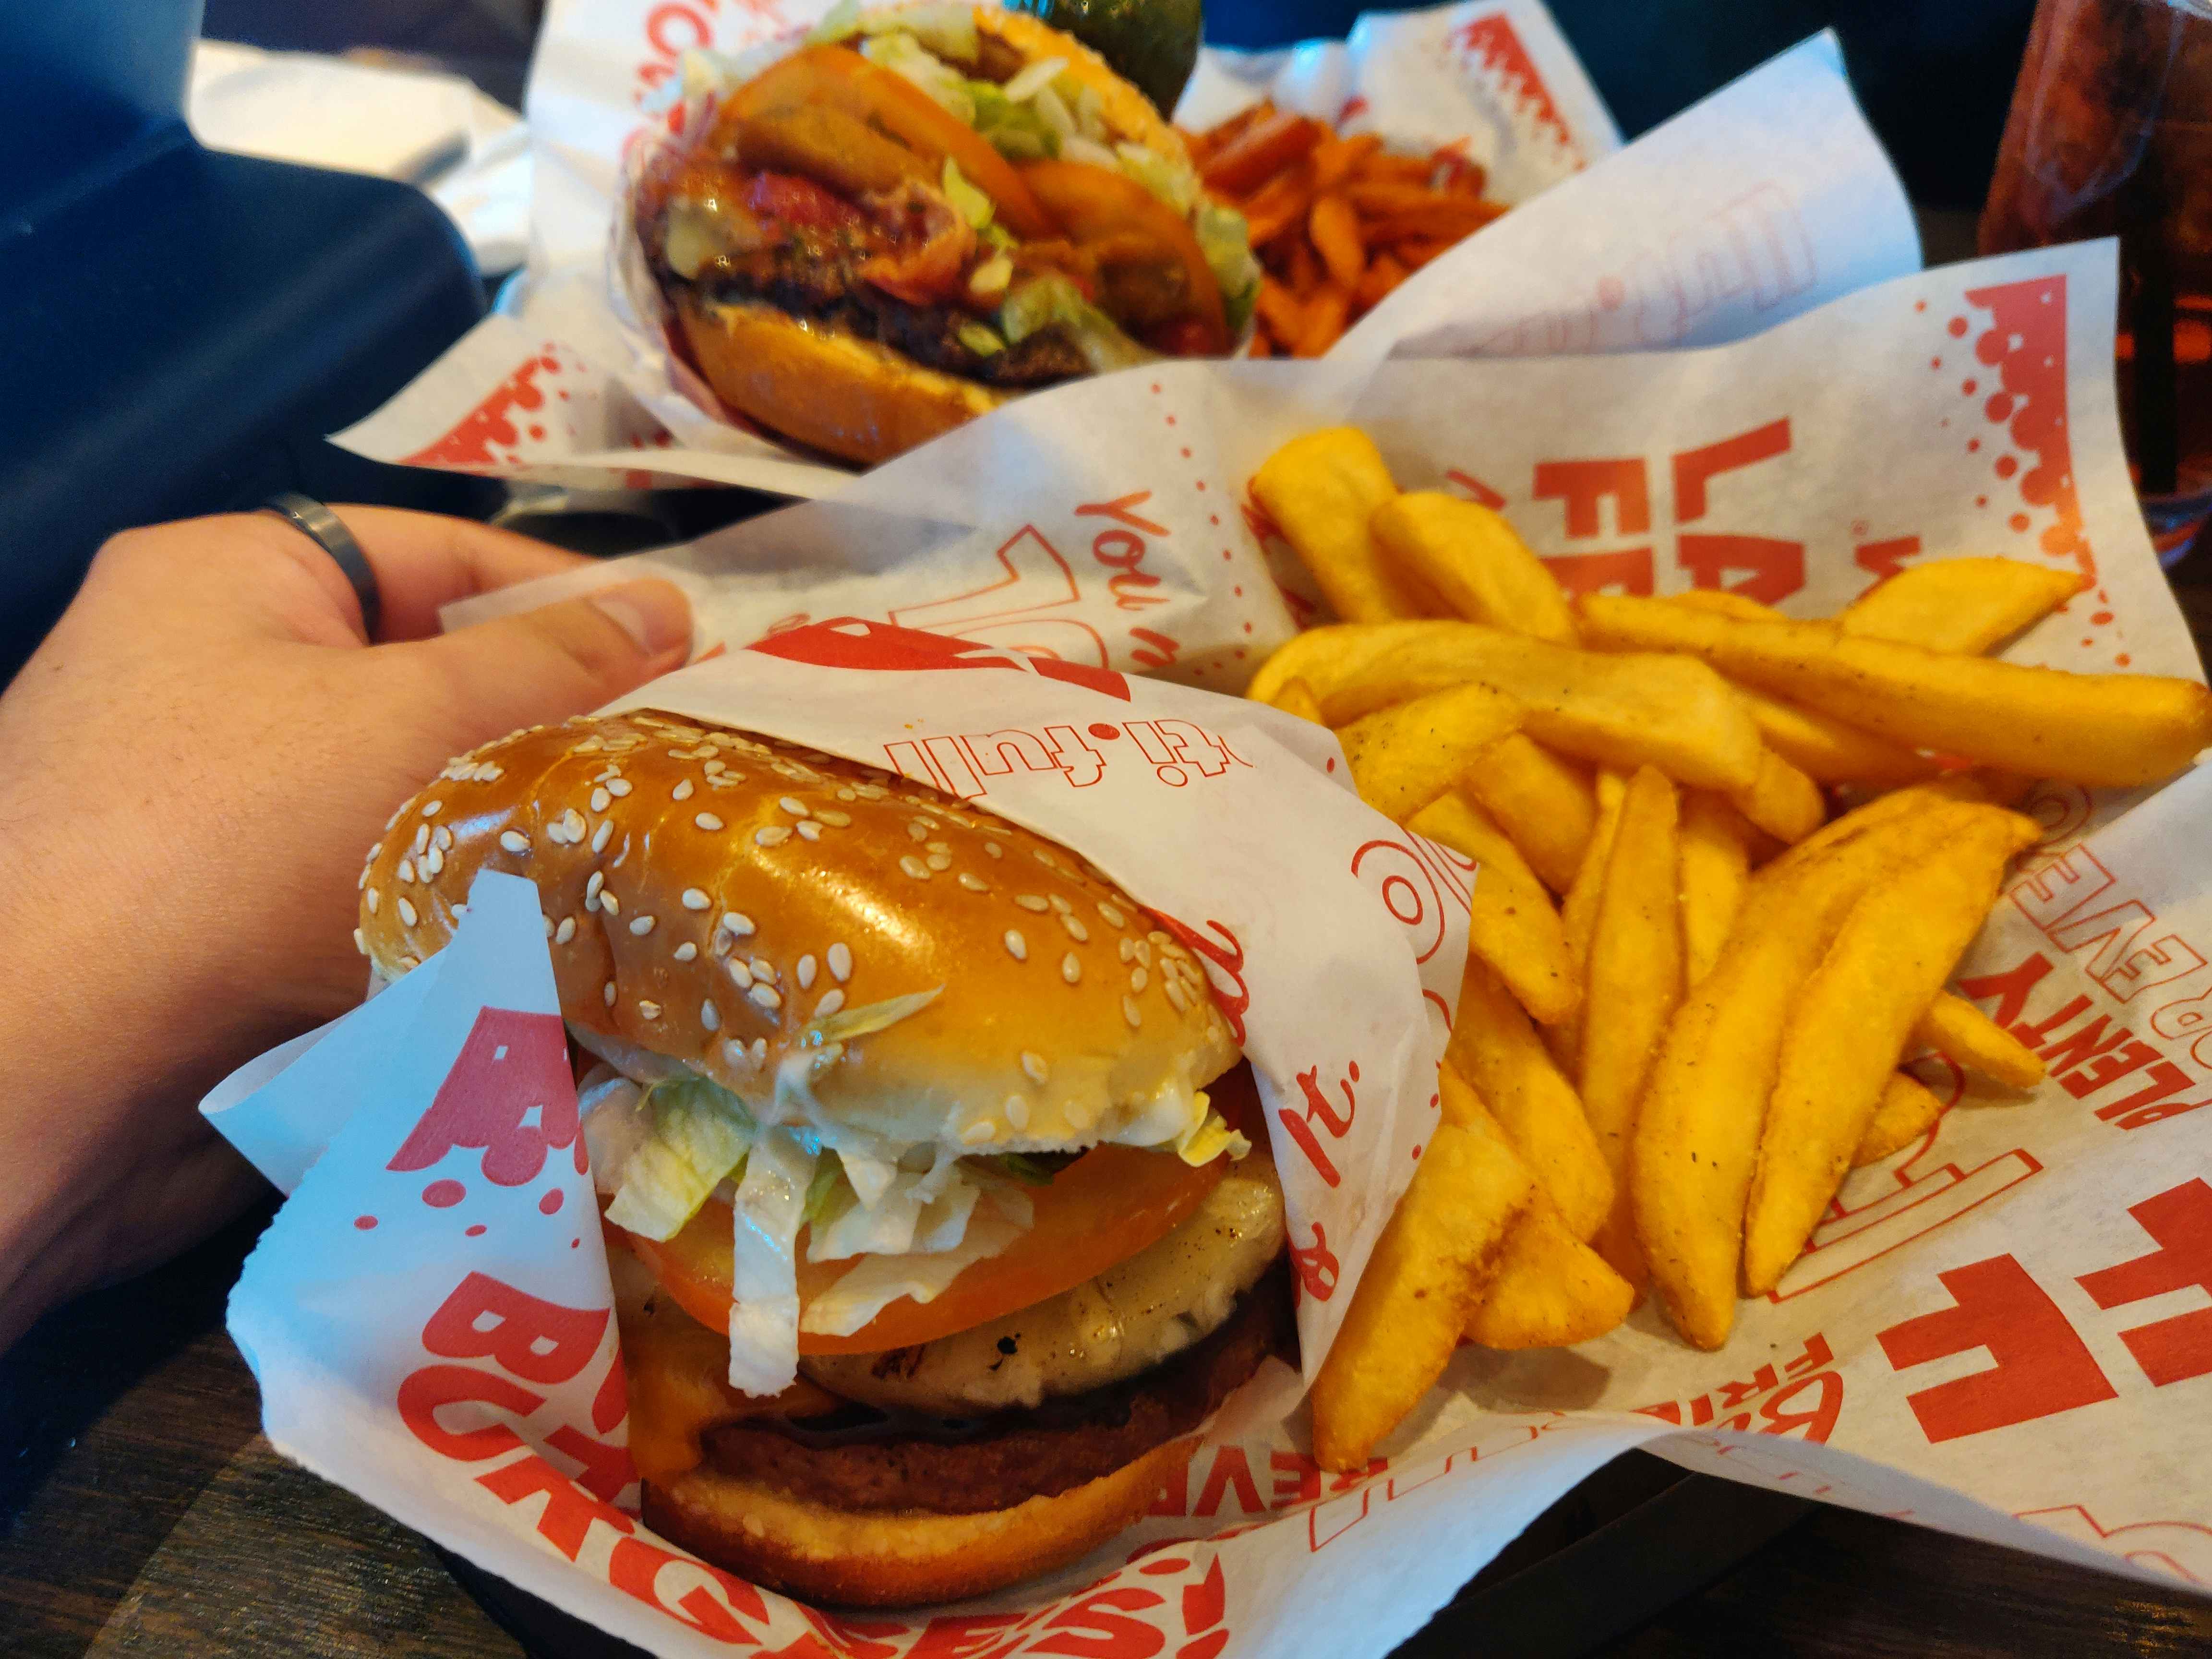 A persons hand holding a basket from Red Robin with a burger and fries with another similar basket on the table in the background.